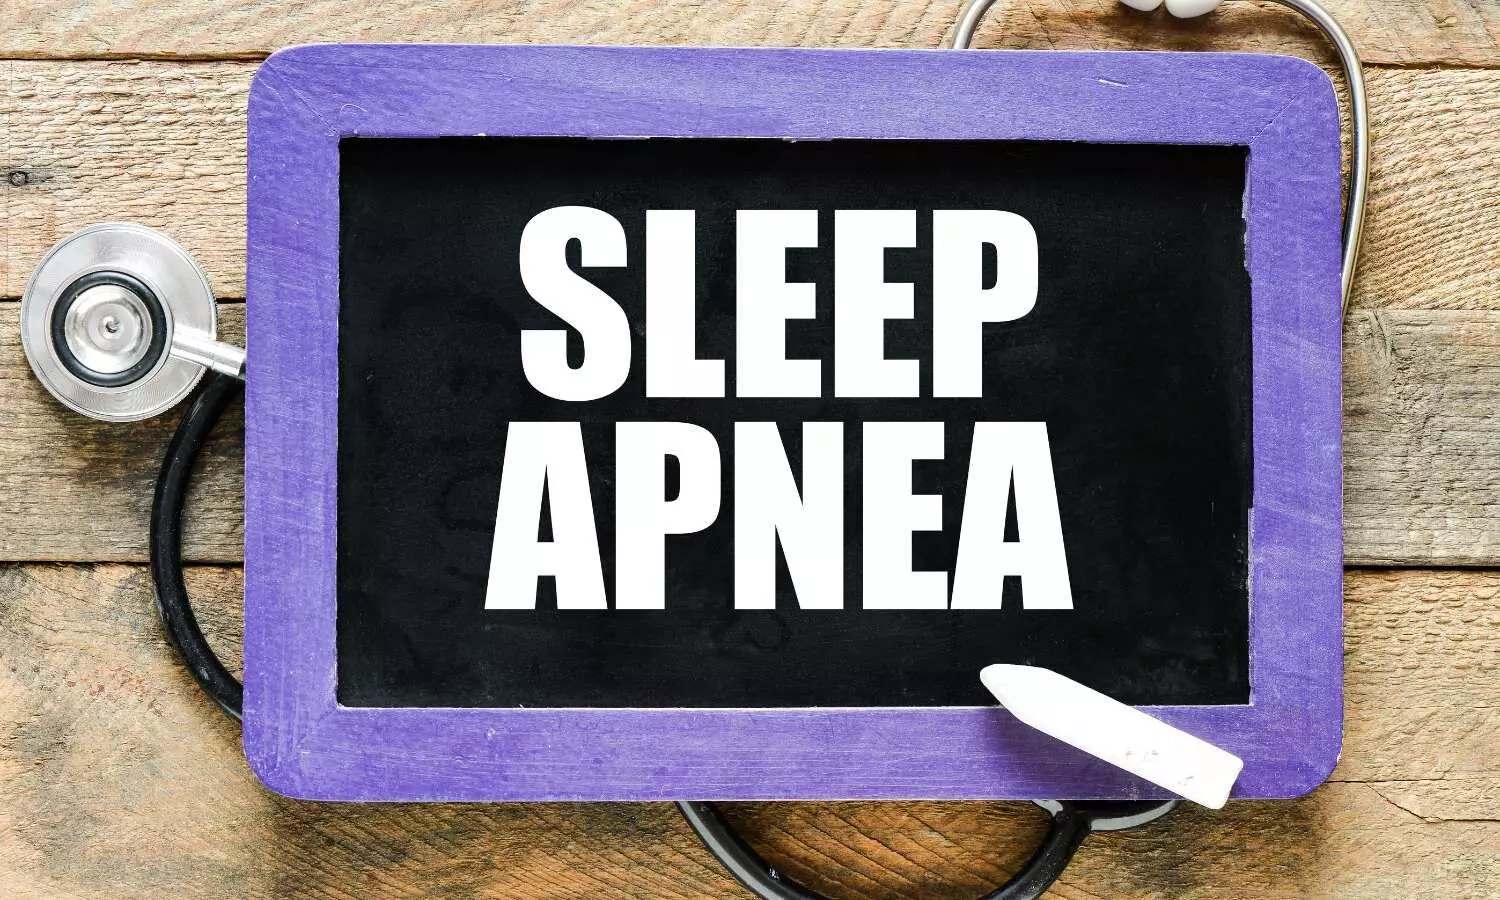 FDA grants clearance to device for sleep apnea diagnosis in an at-home ...